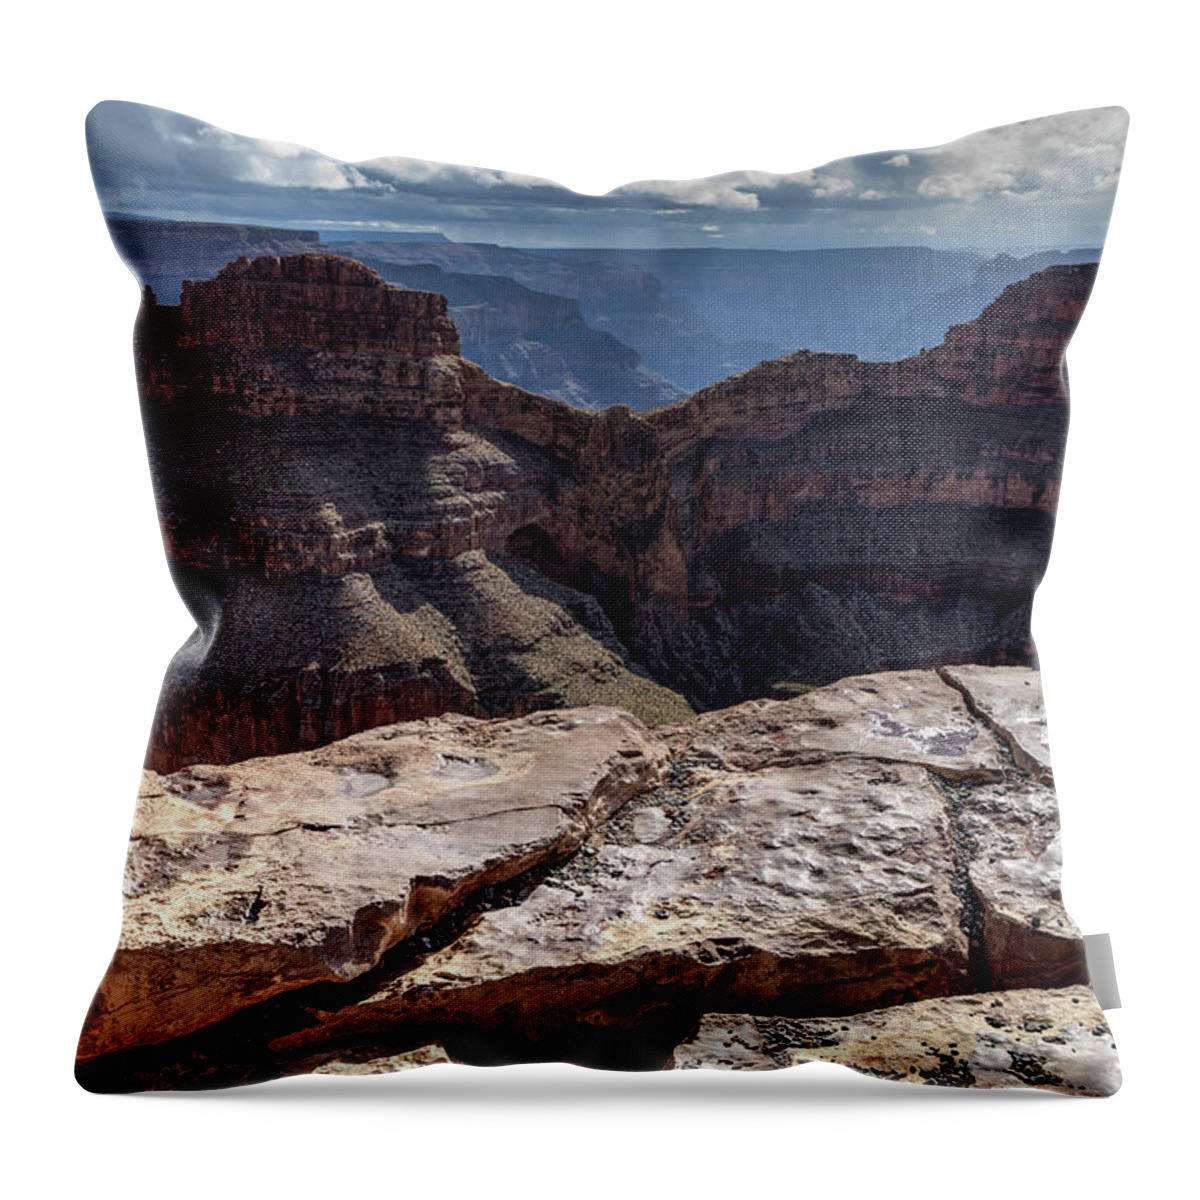 Arizona Throw Pillow featuring the photograph Eagle Point by James Marvin Phelps